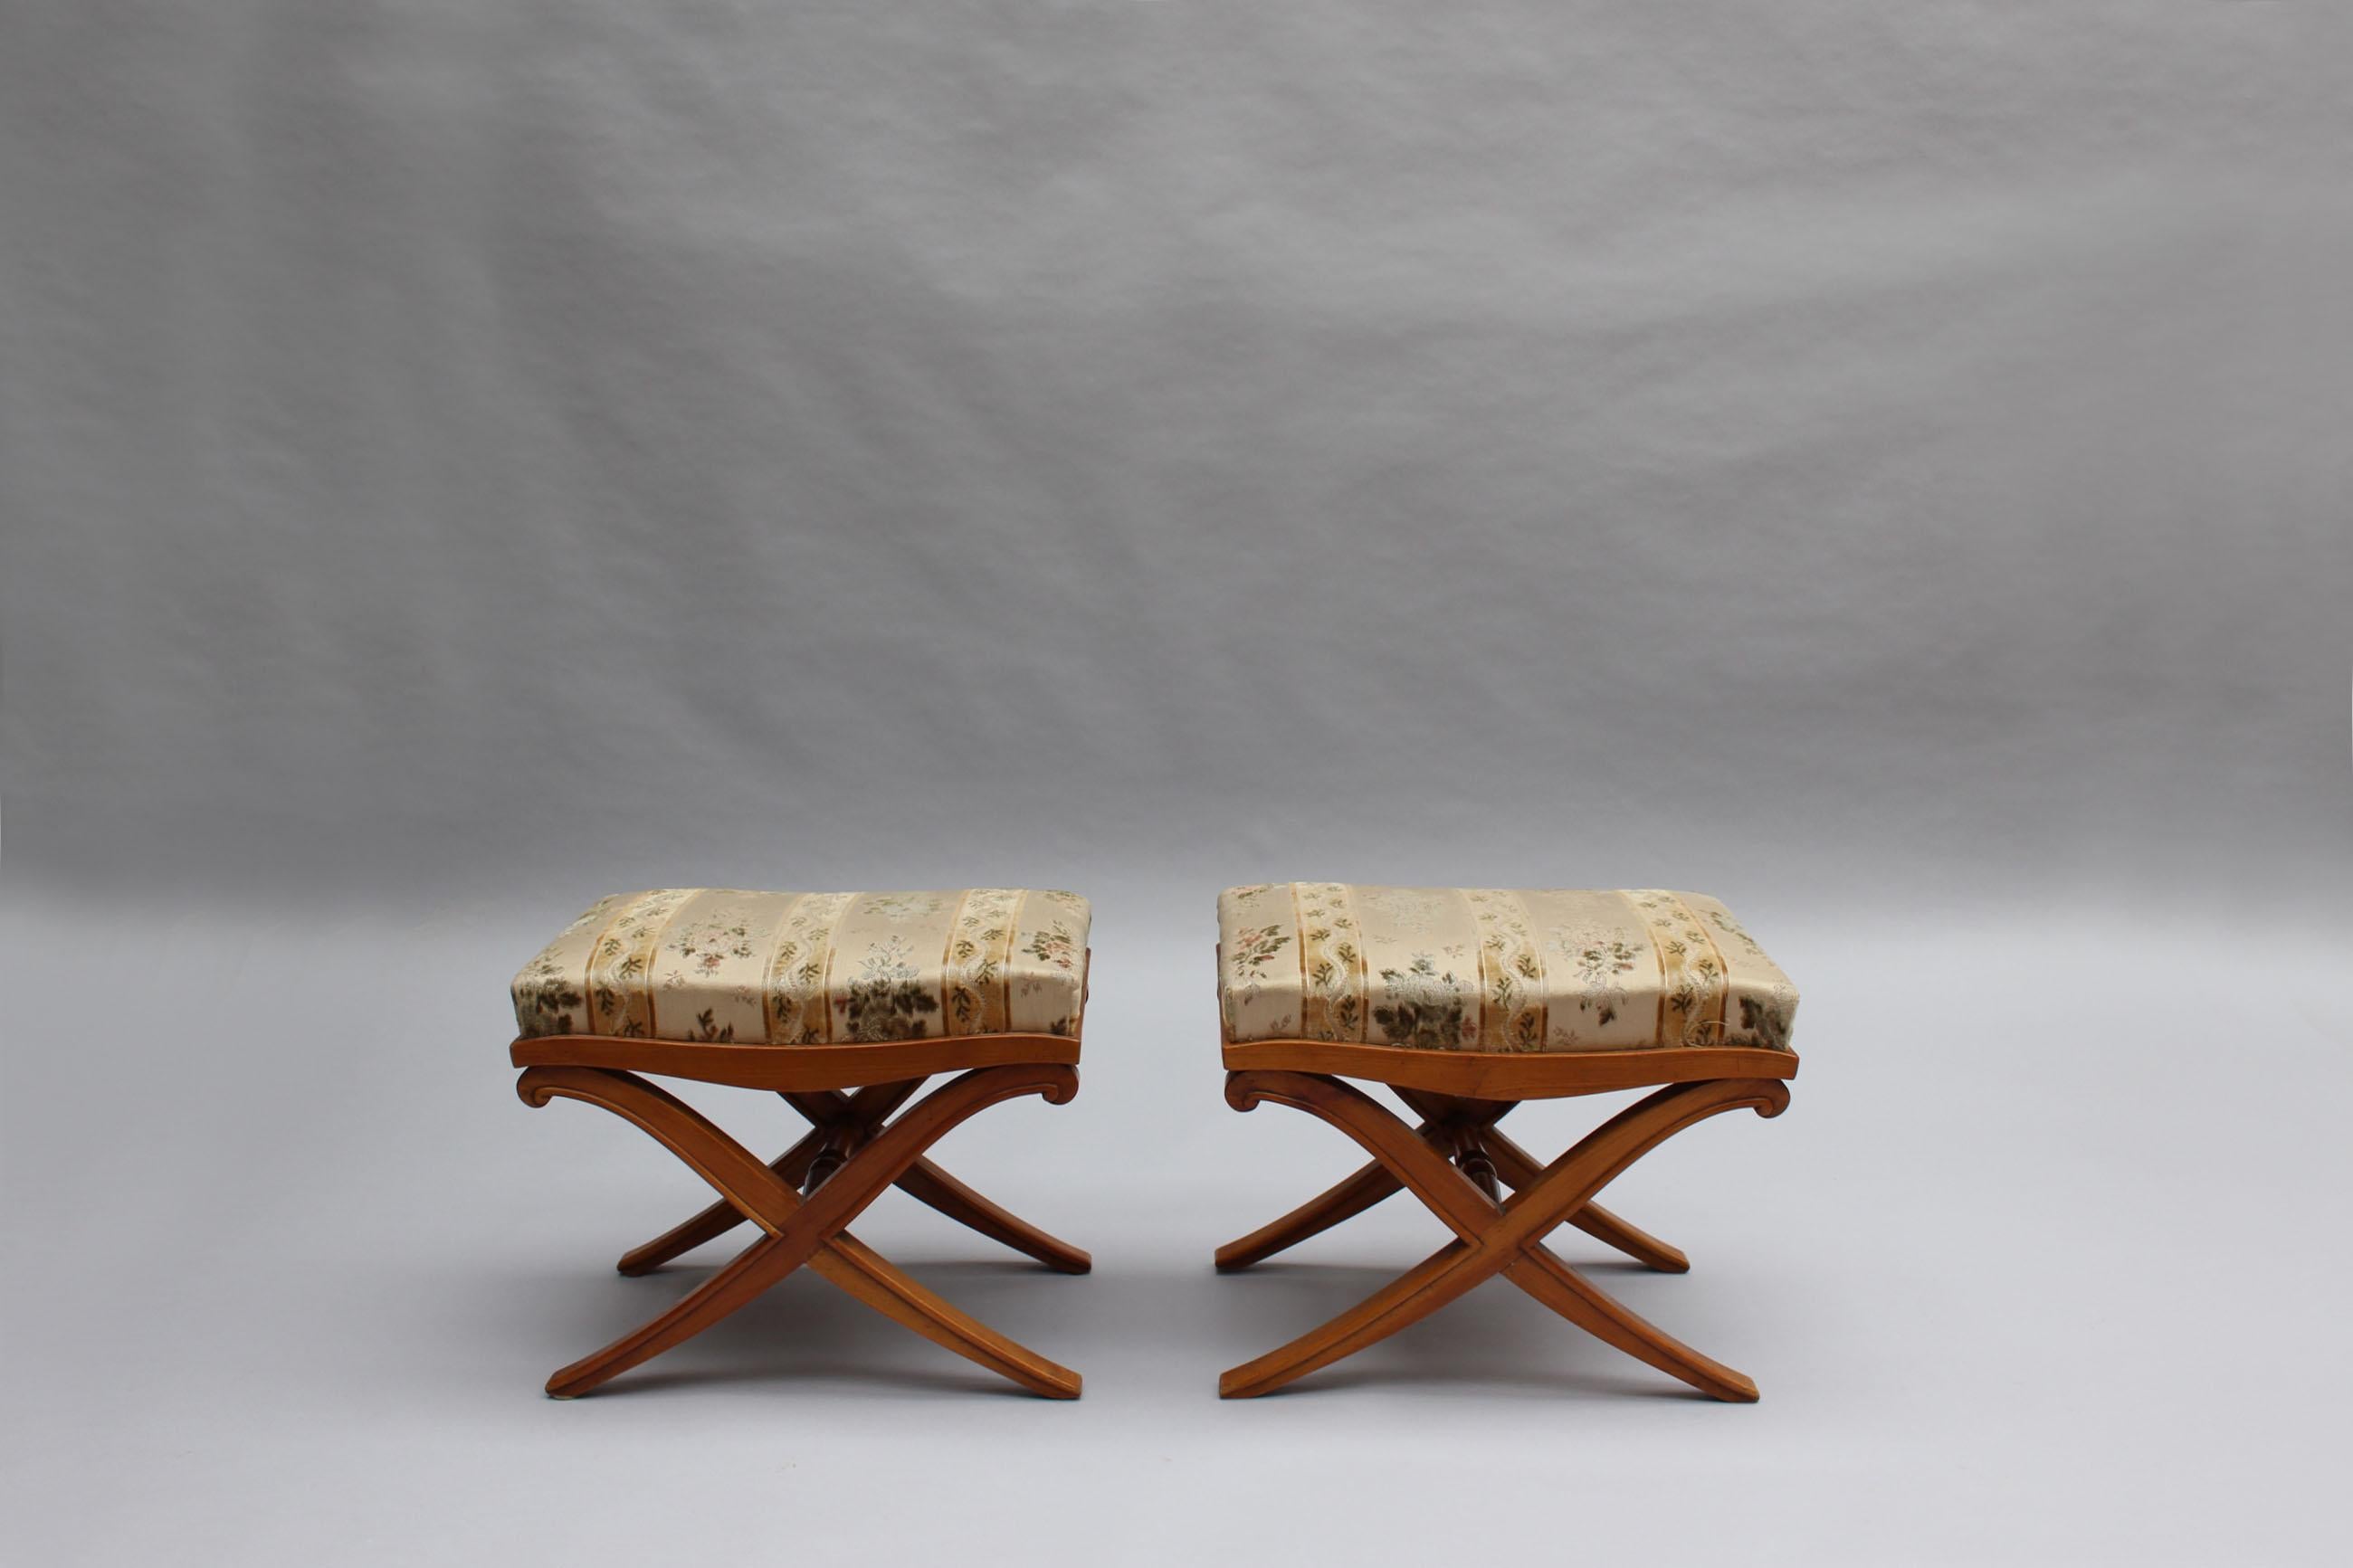 A pair of fine French 1940s X-form stool in cherry wood.